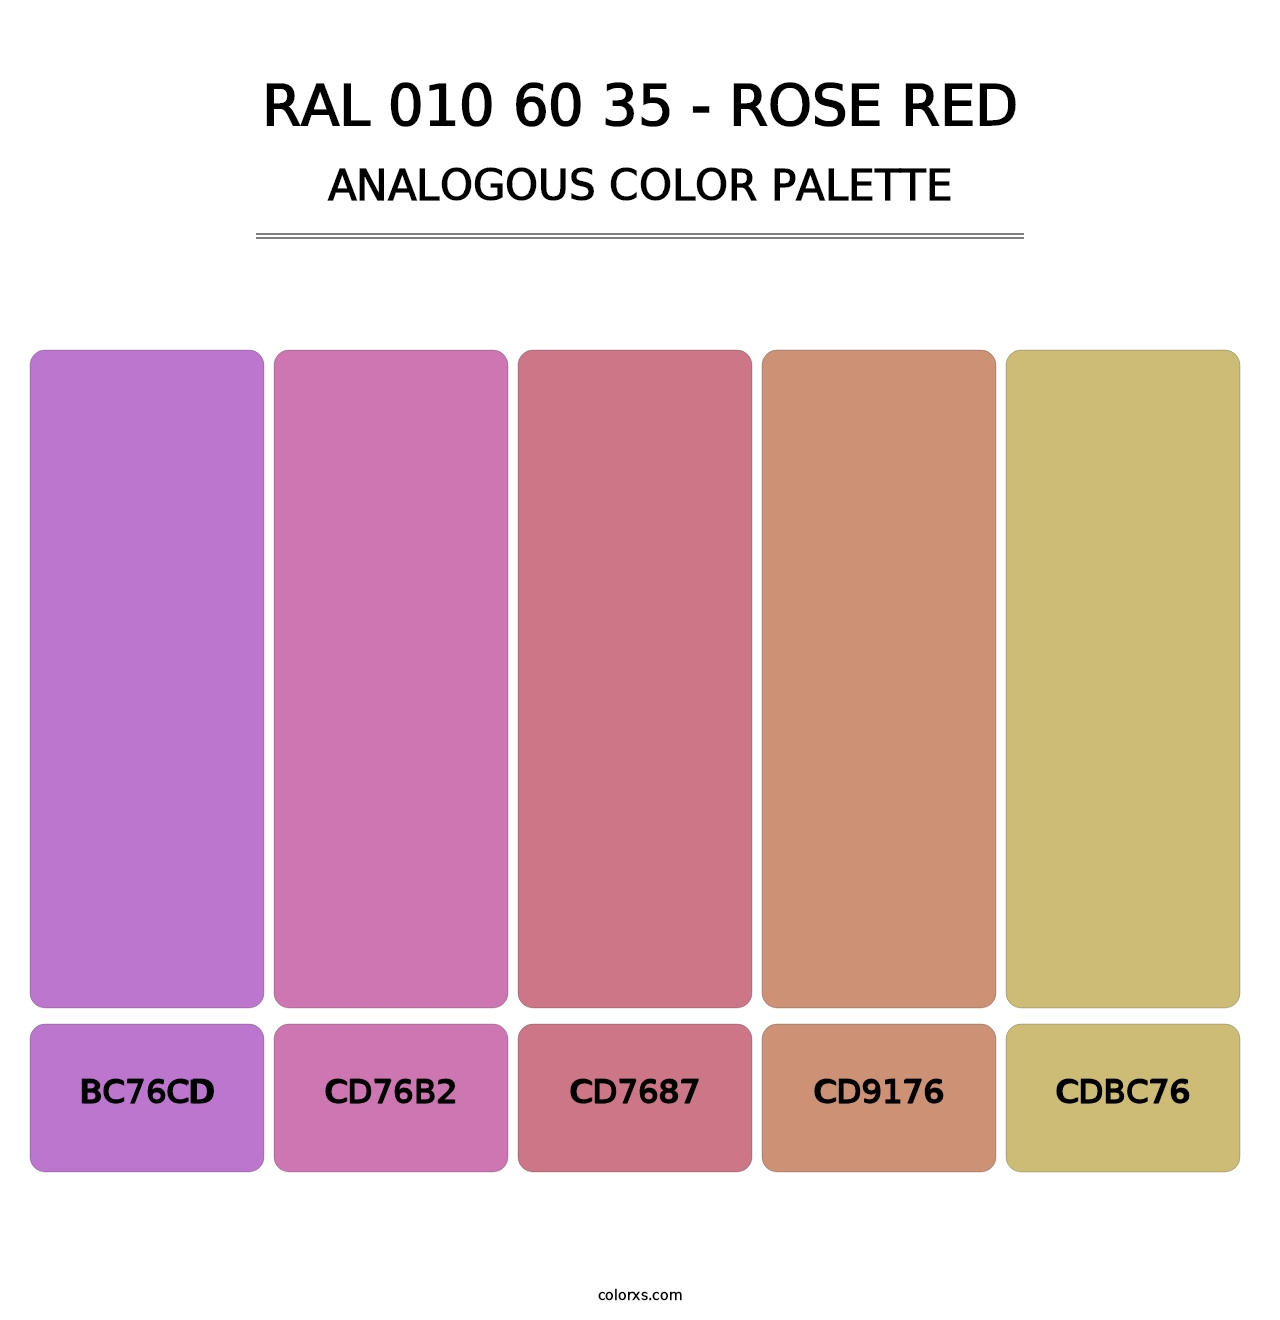 RAL 010 60 35 - Rose Red - Analogous Color Palette